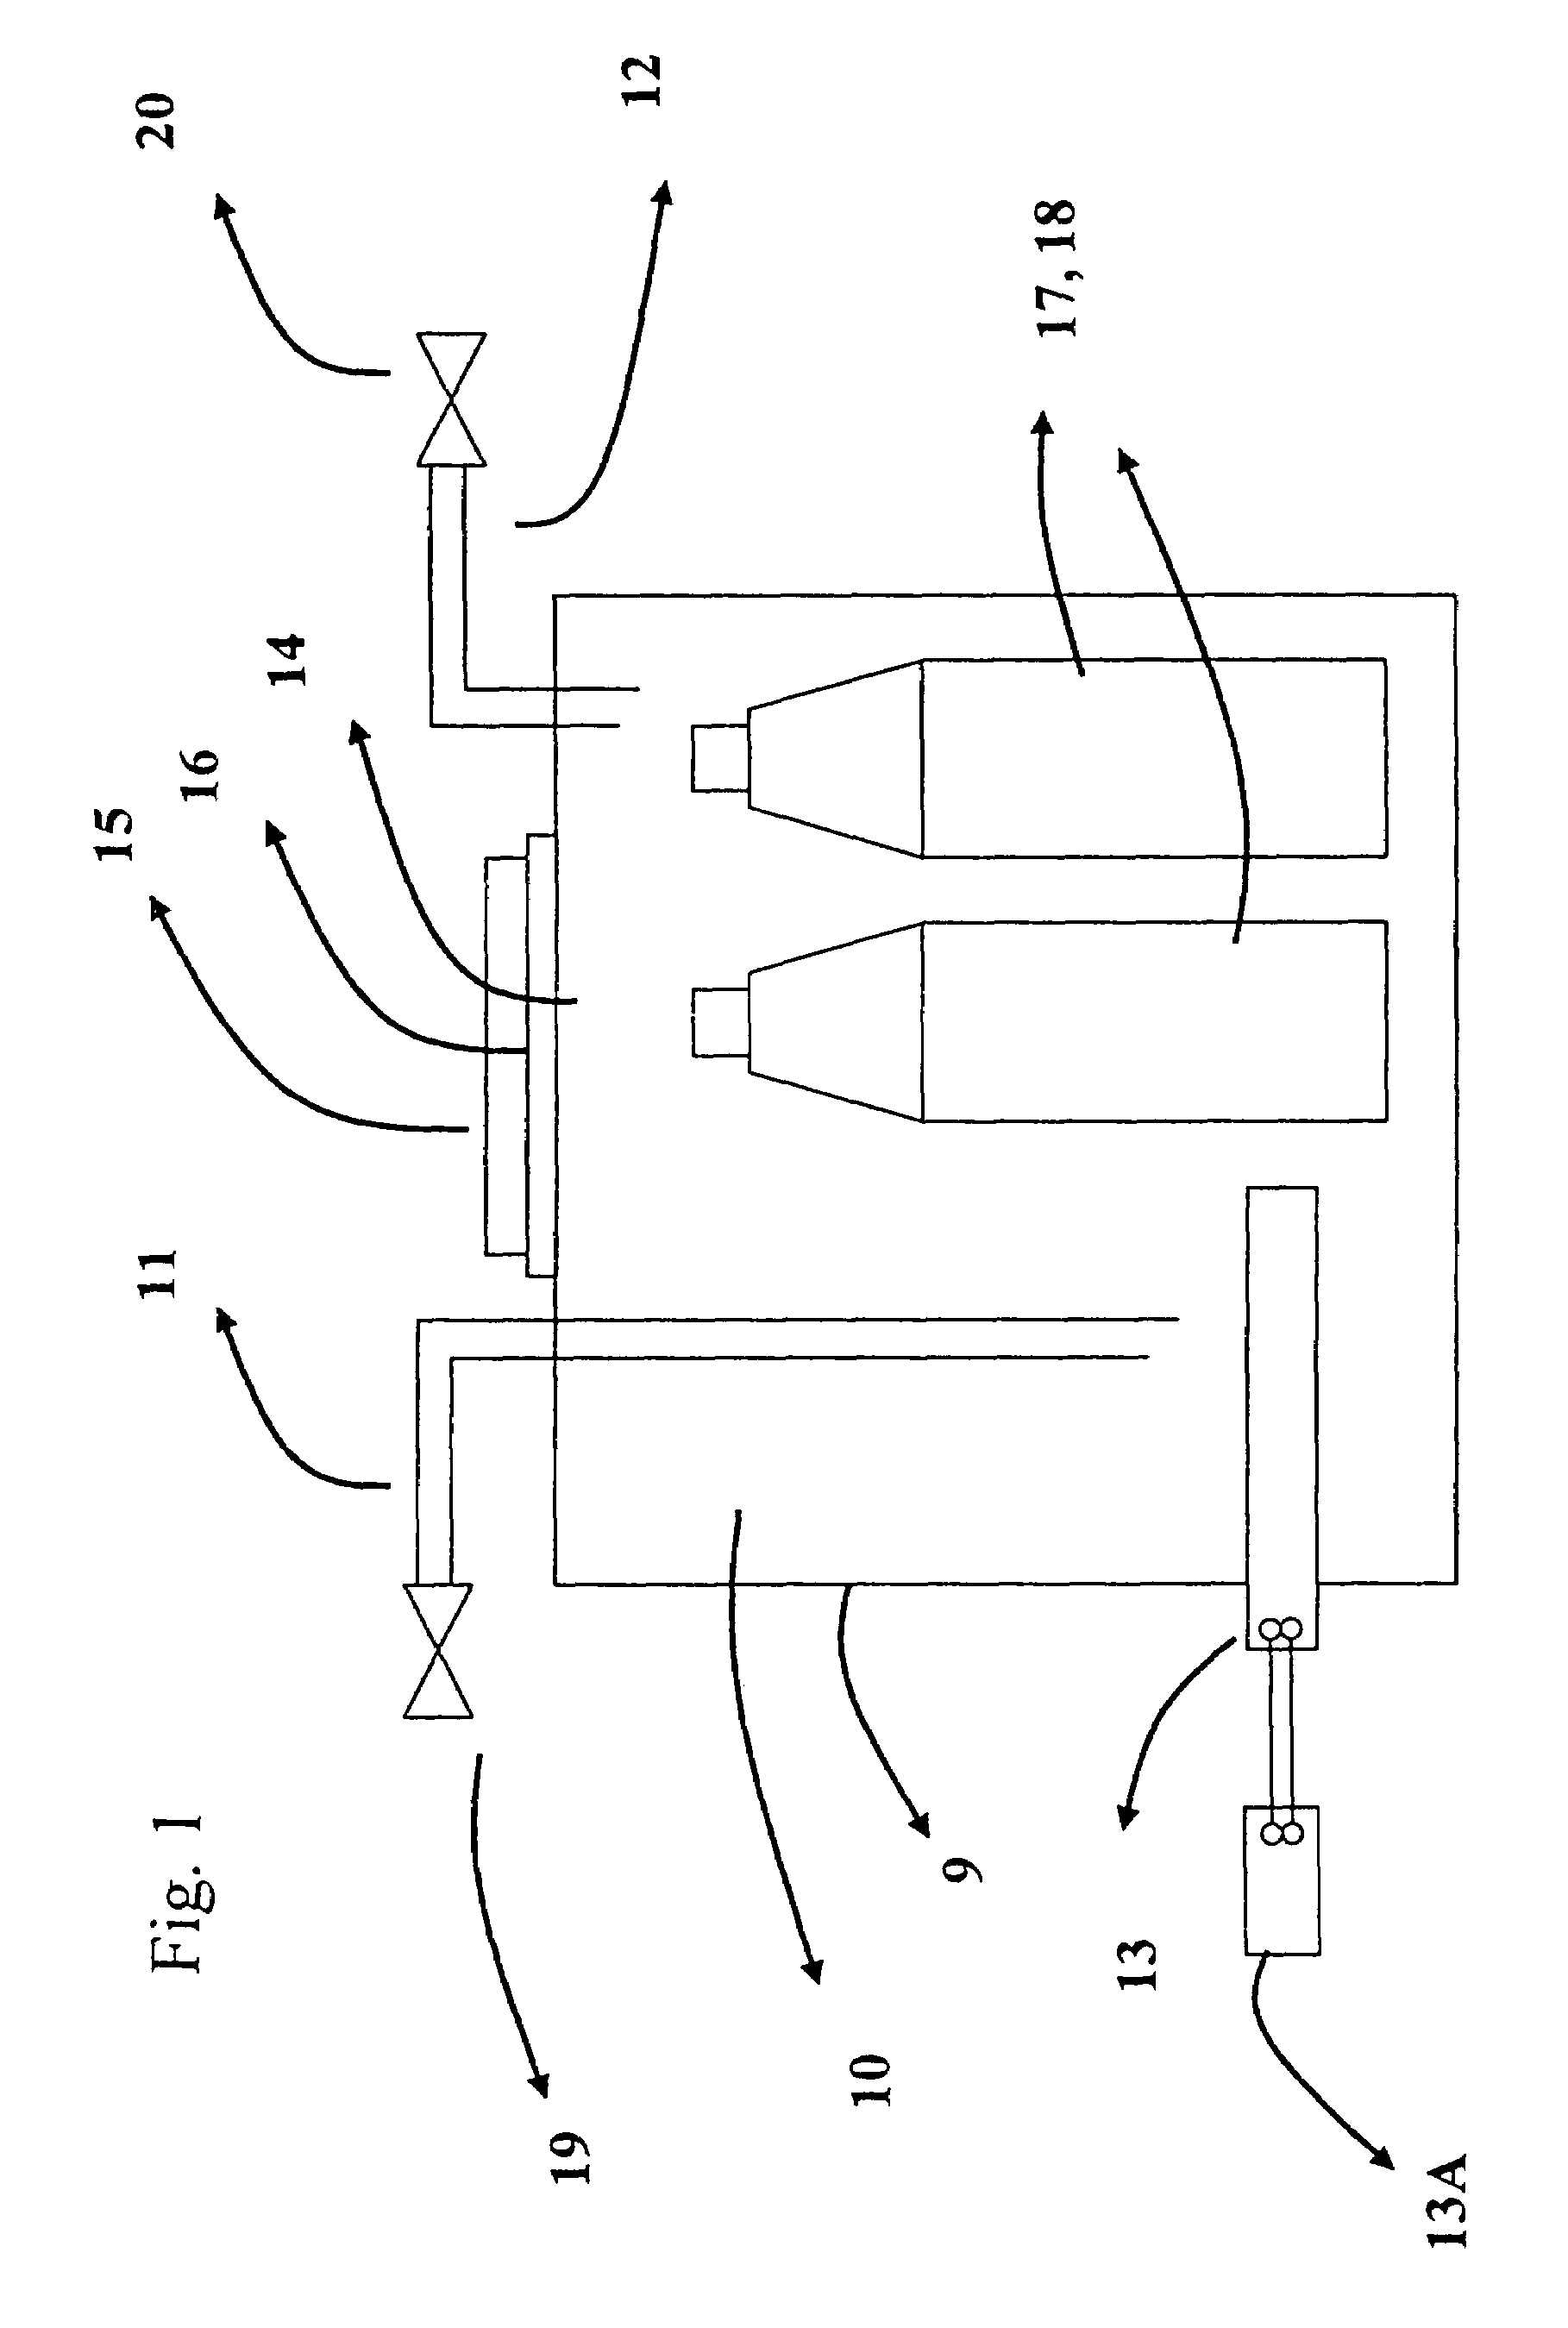 Apparatus and technique for measuring permeability and permeant sorption